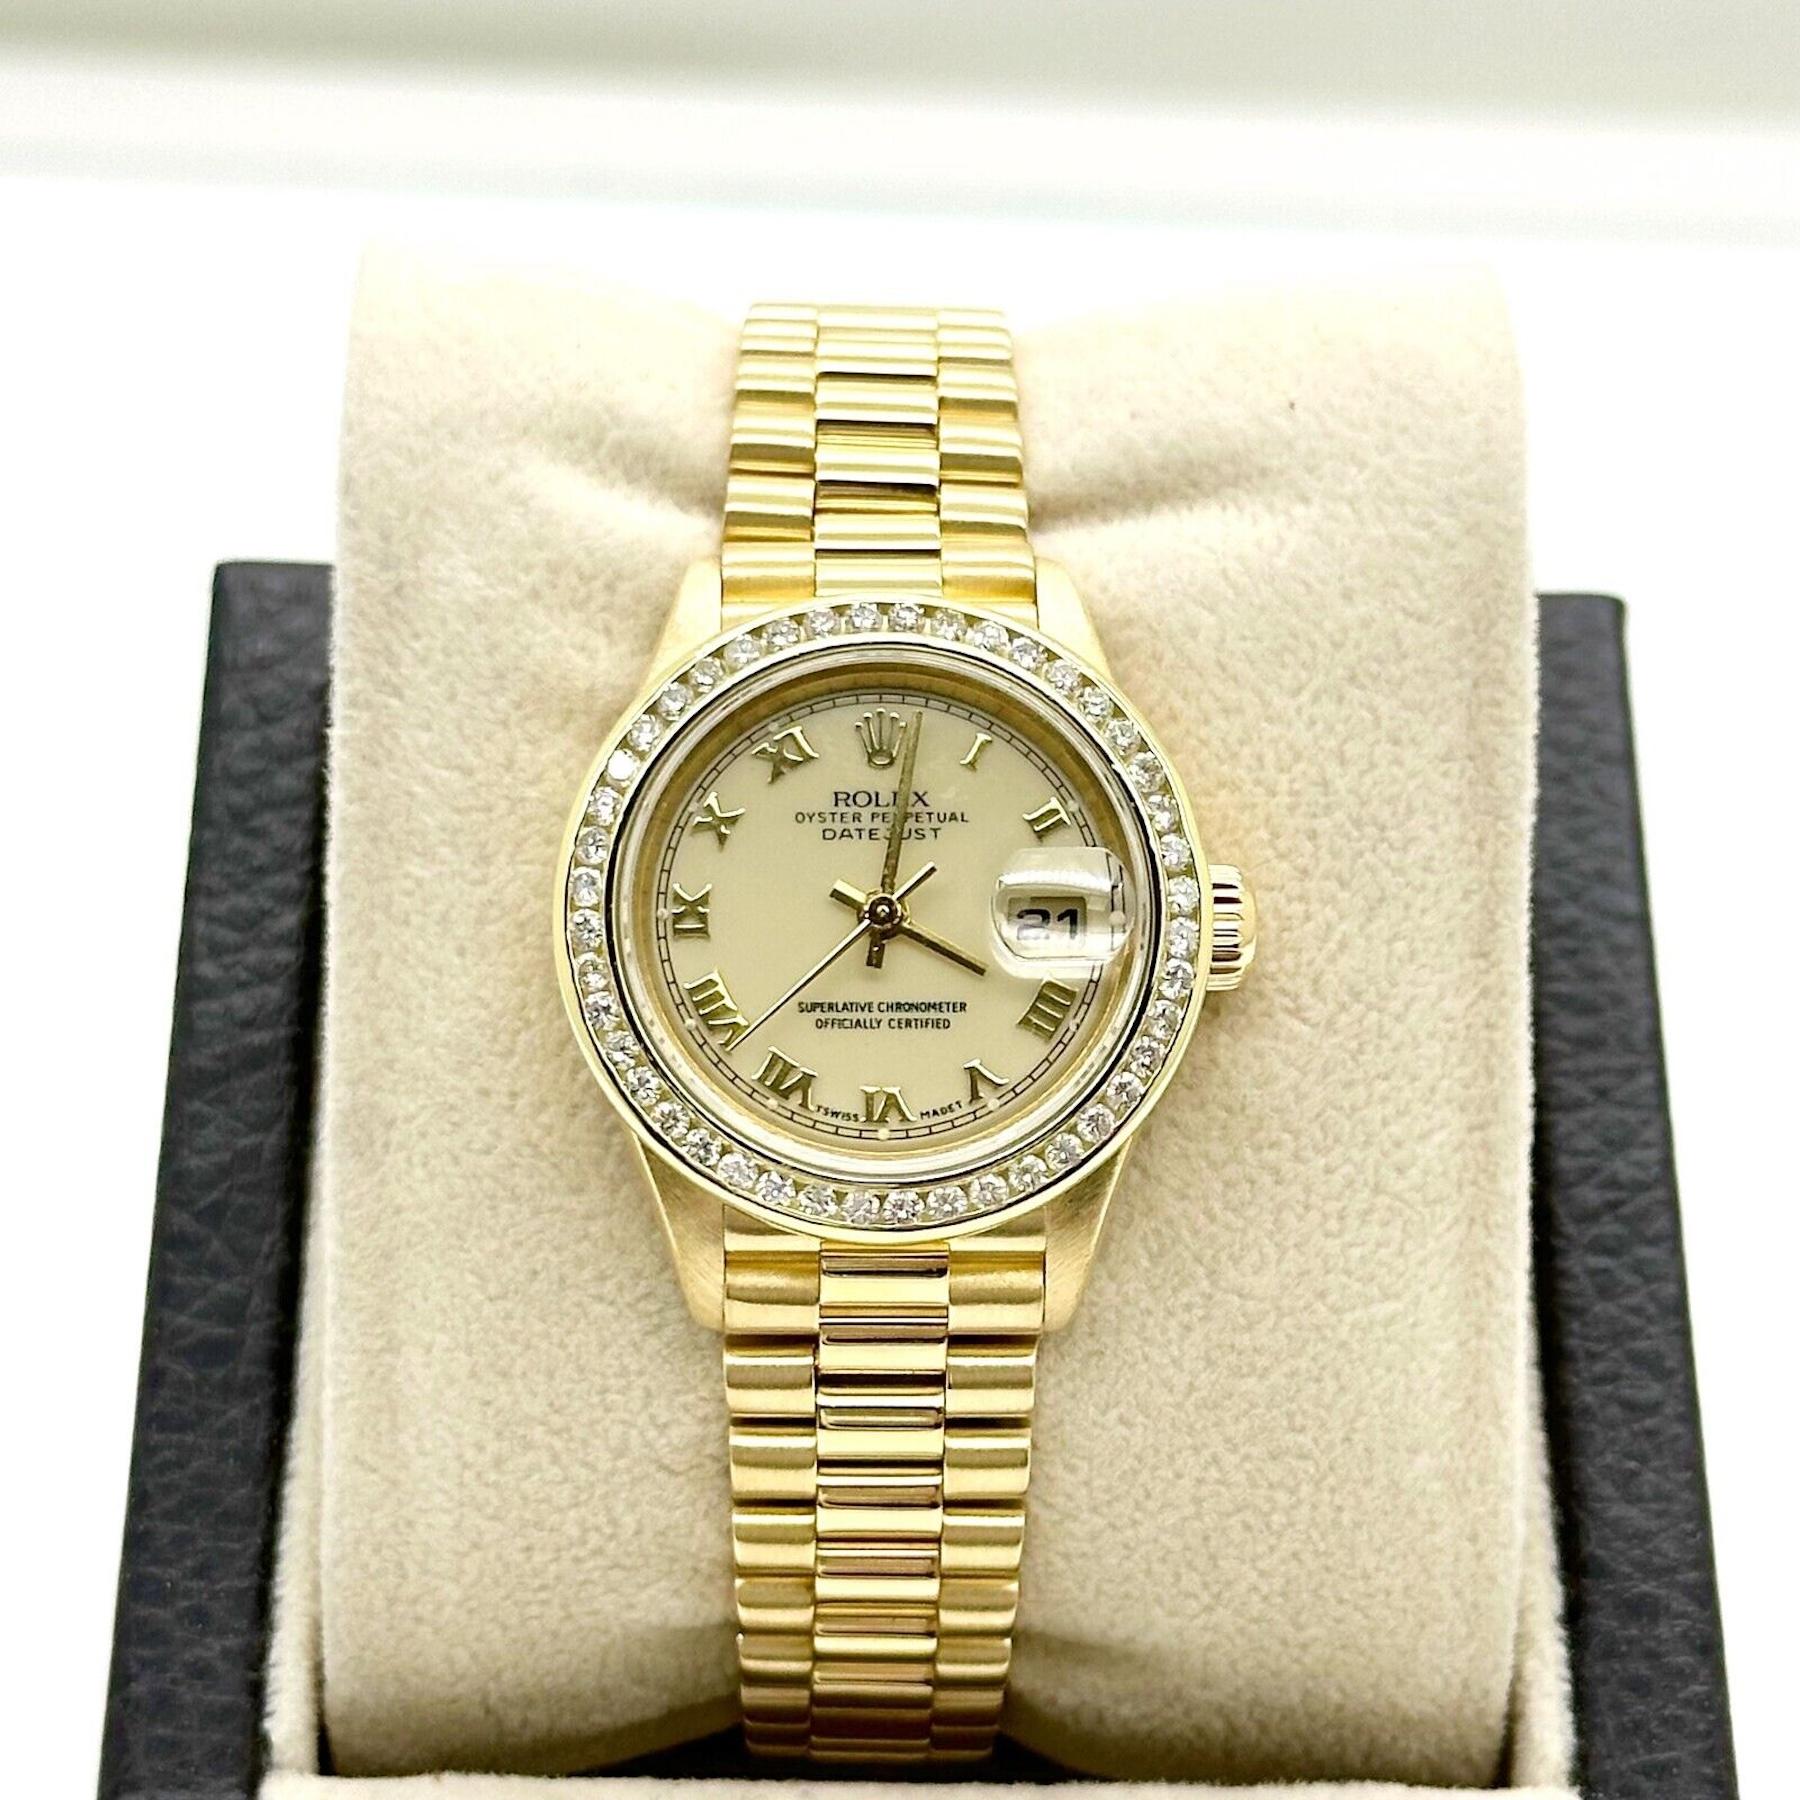 Style Number: 79178

Serial: A113***

Year: 1999

Model:  Ladies President Datejust
  
Case Material: 18K Yellow Gold

Band: 18K Yellow Gold

Bezel: Custom Diamond Bezel
 
Dial: Cream Roman Dial

Face: Sapphire Crystal

Case Size: 26mm

Includes: